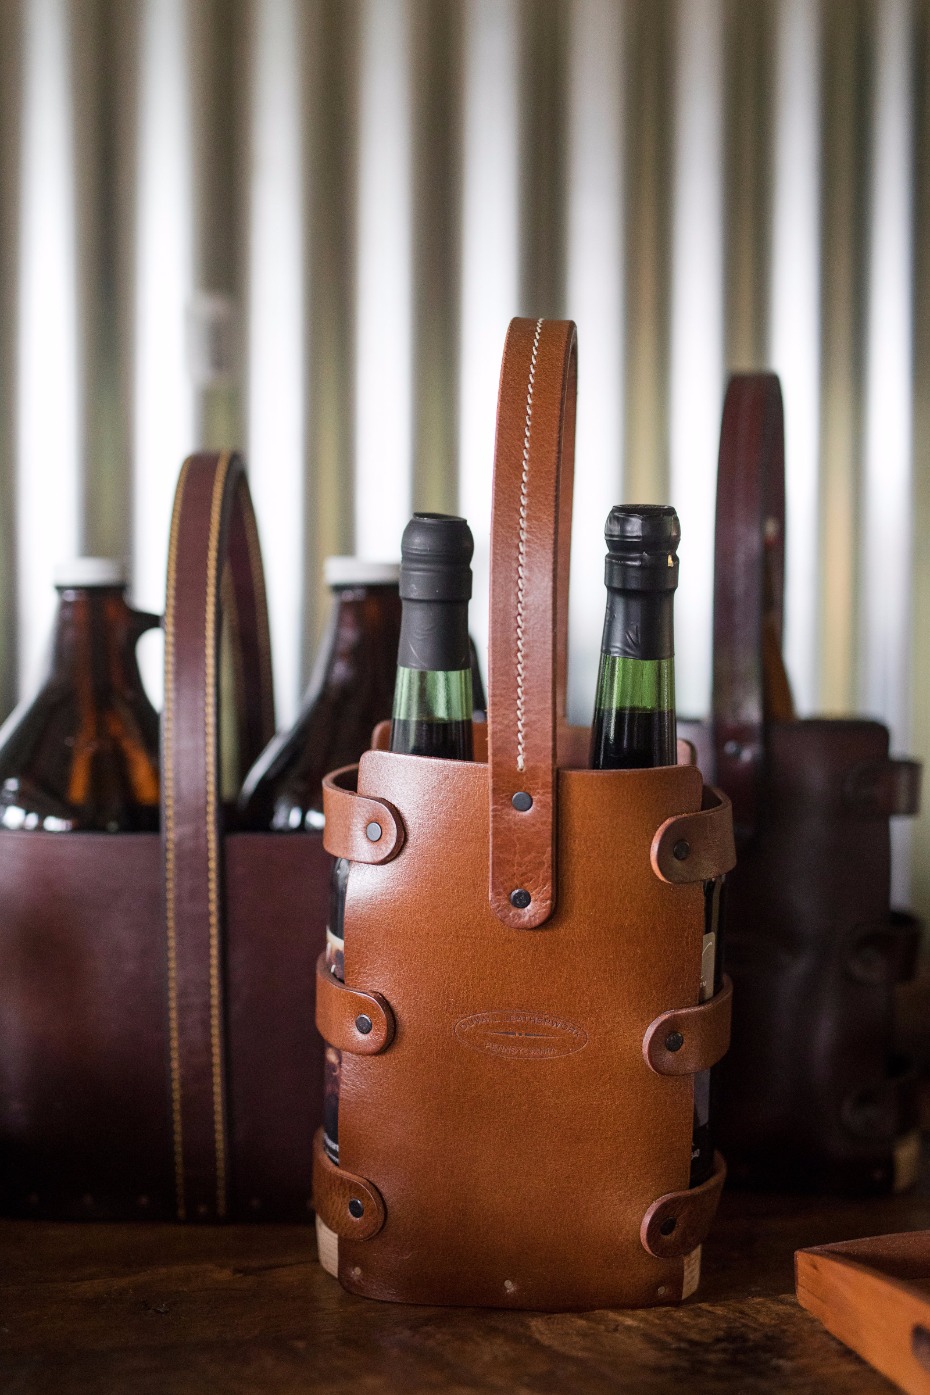 wine and growler caddies are the prefect groomsmen gifts